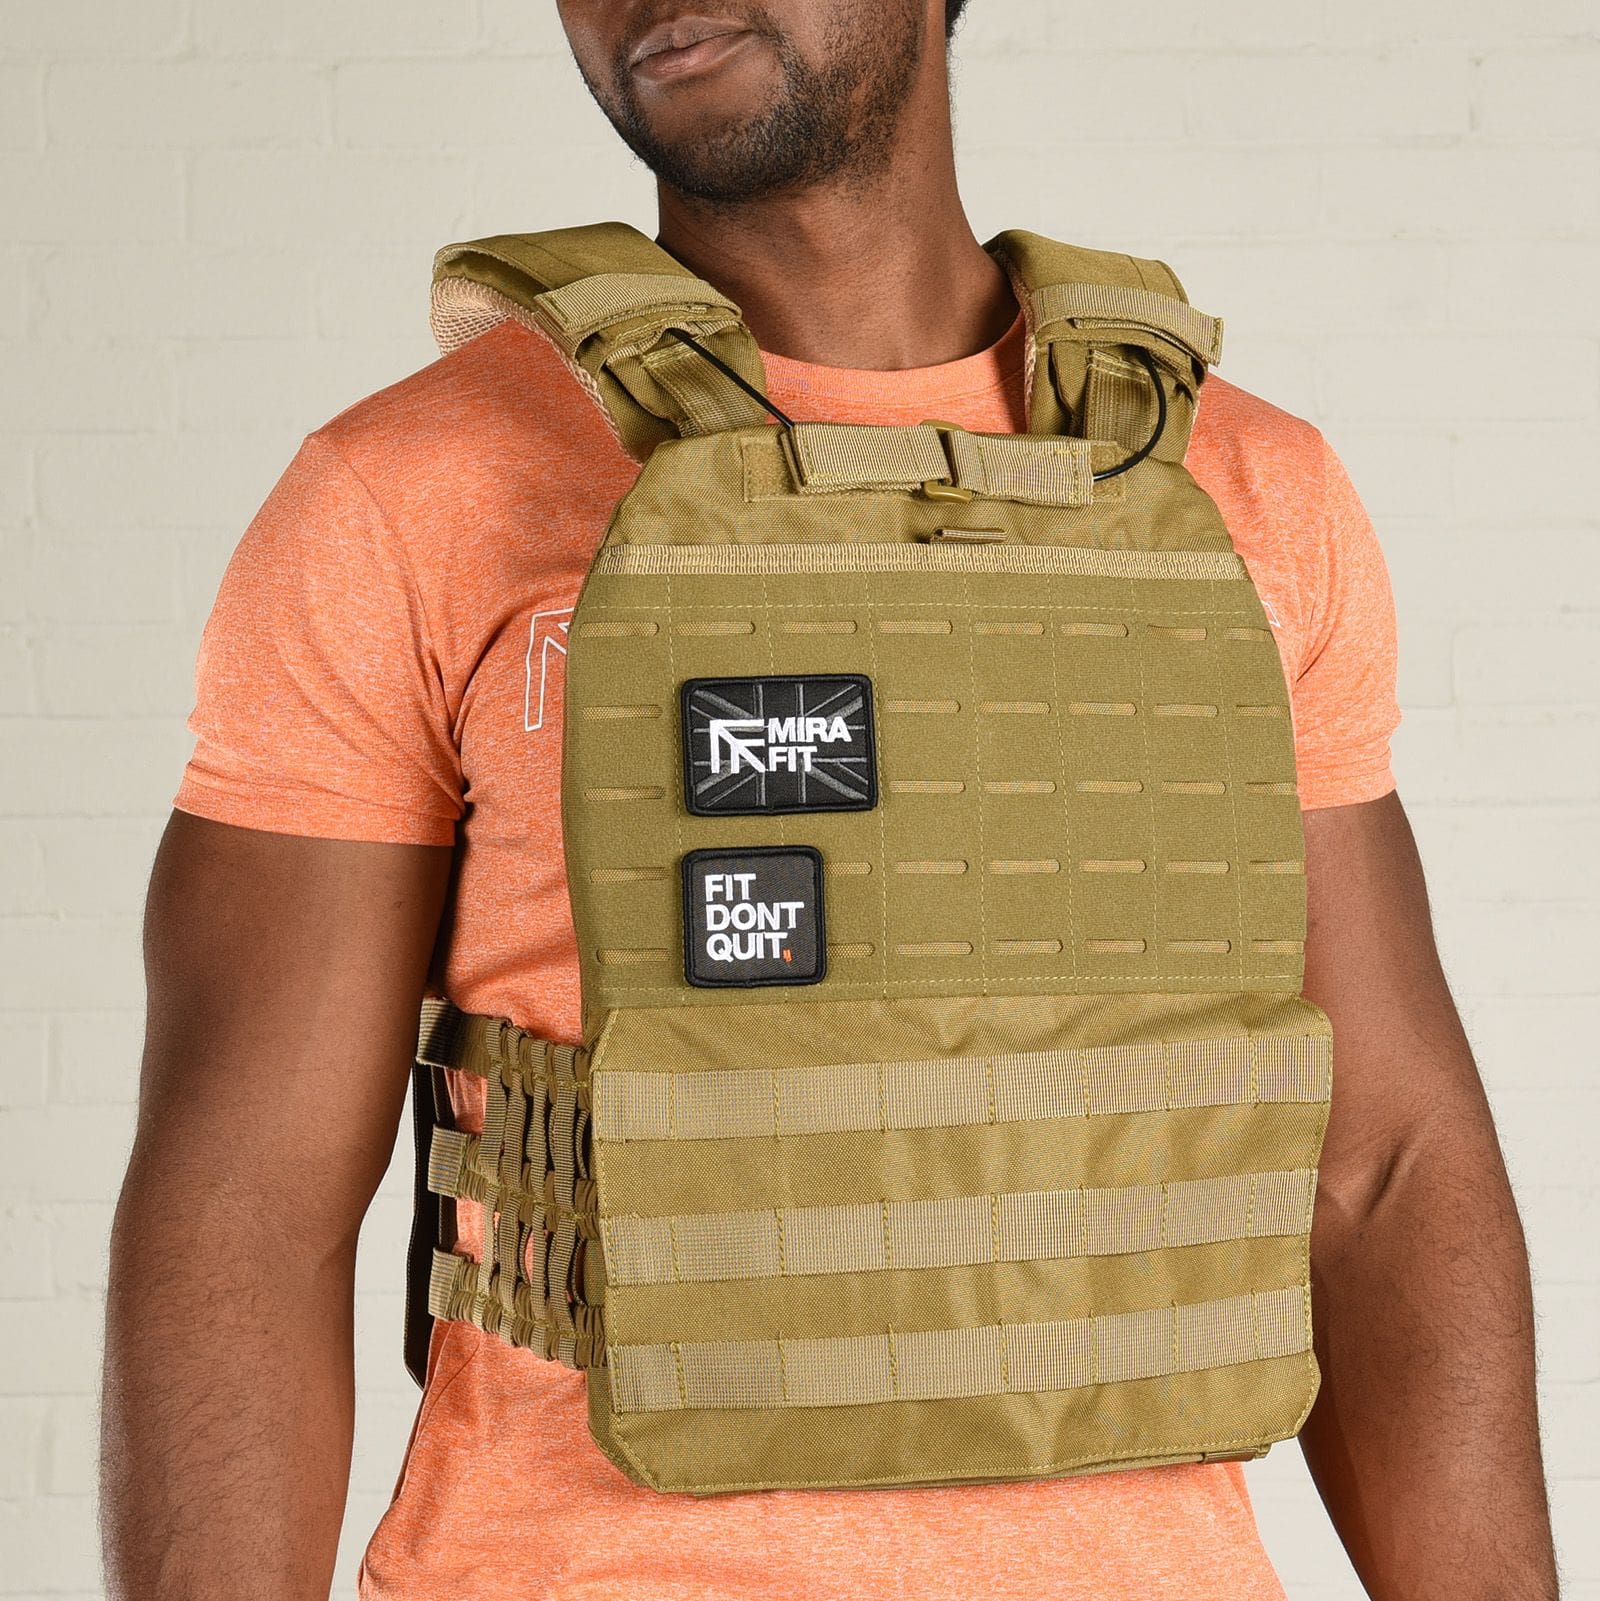 Mirafit Tactical Weight Vest Review